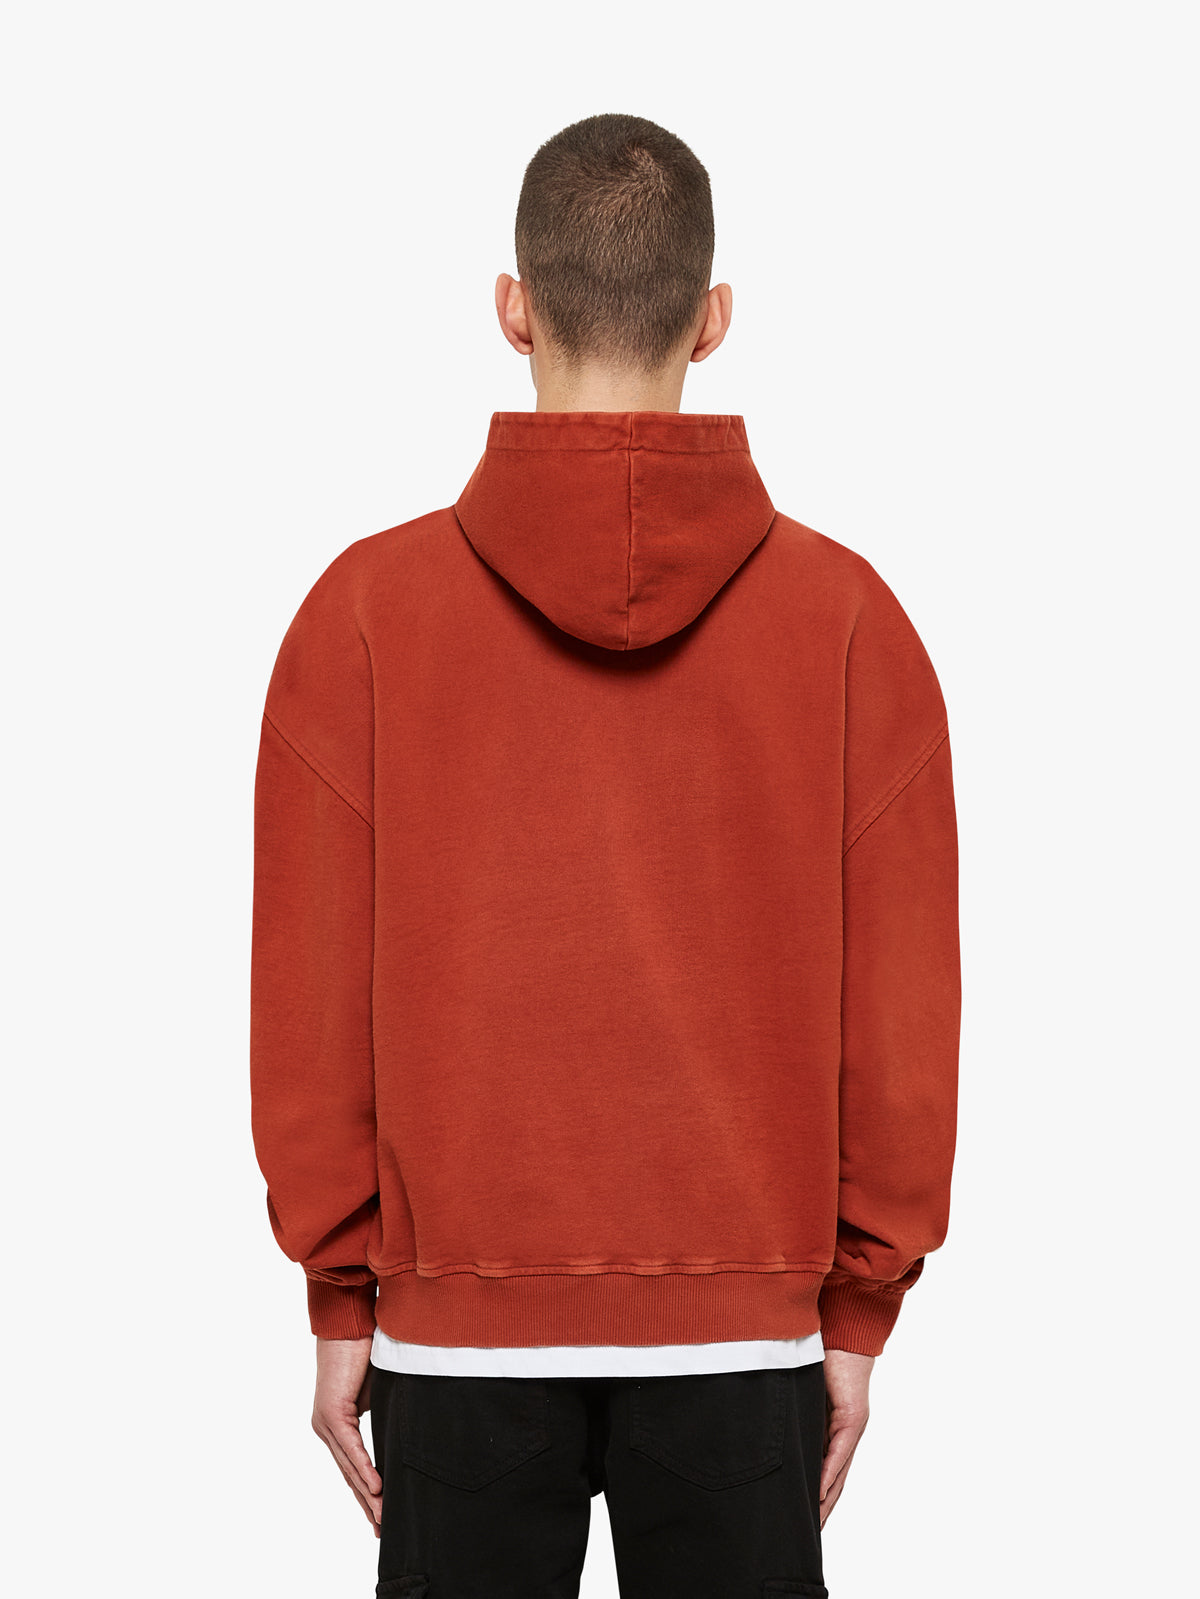 HOODIE 'R' - WASHED RED